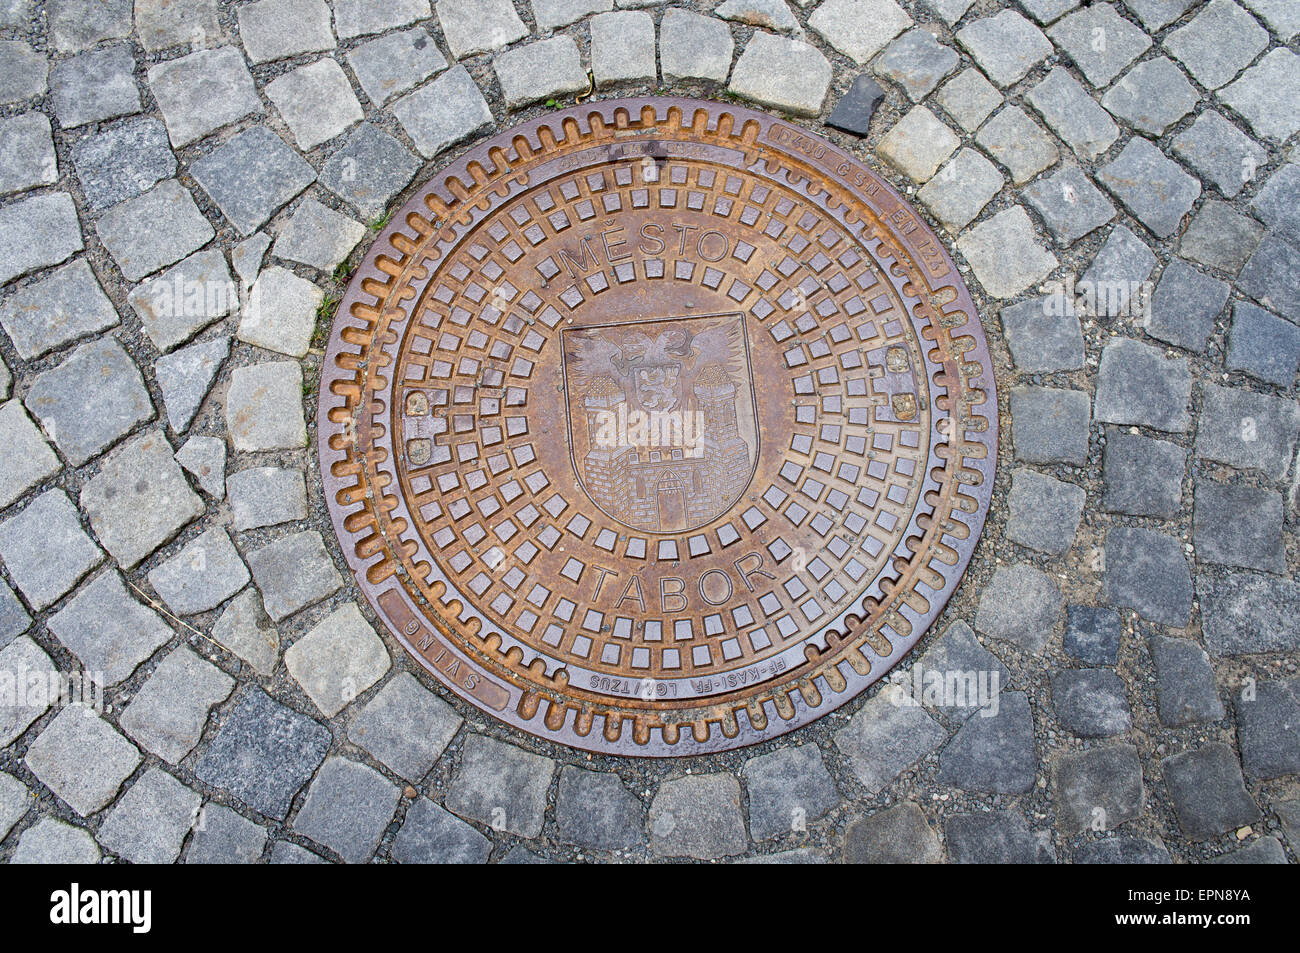 street, sewer lid on a street, the CITY of TABOR Stock Photo